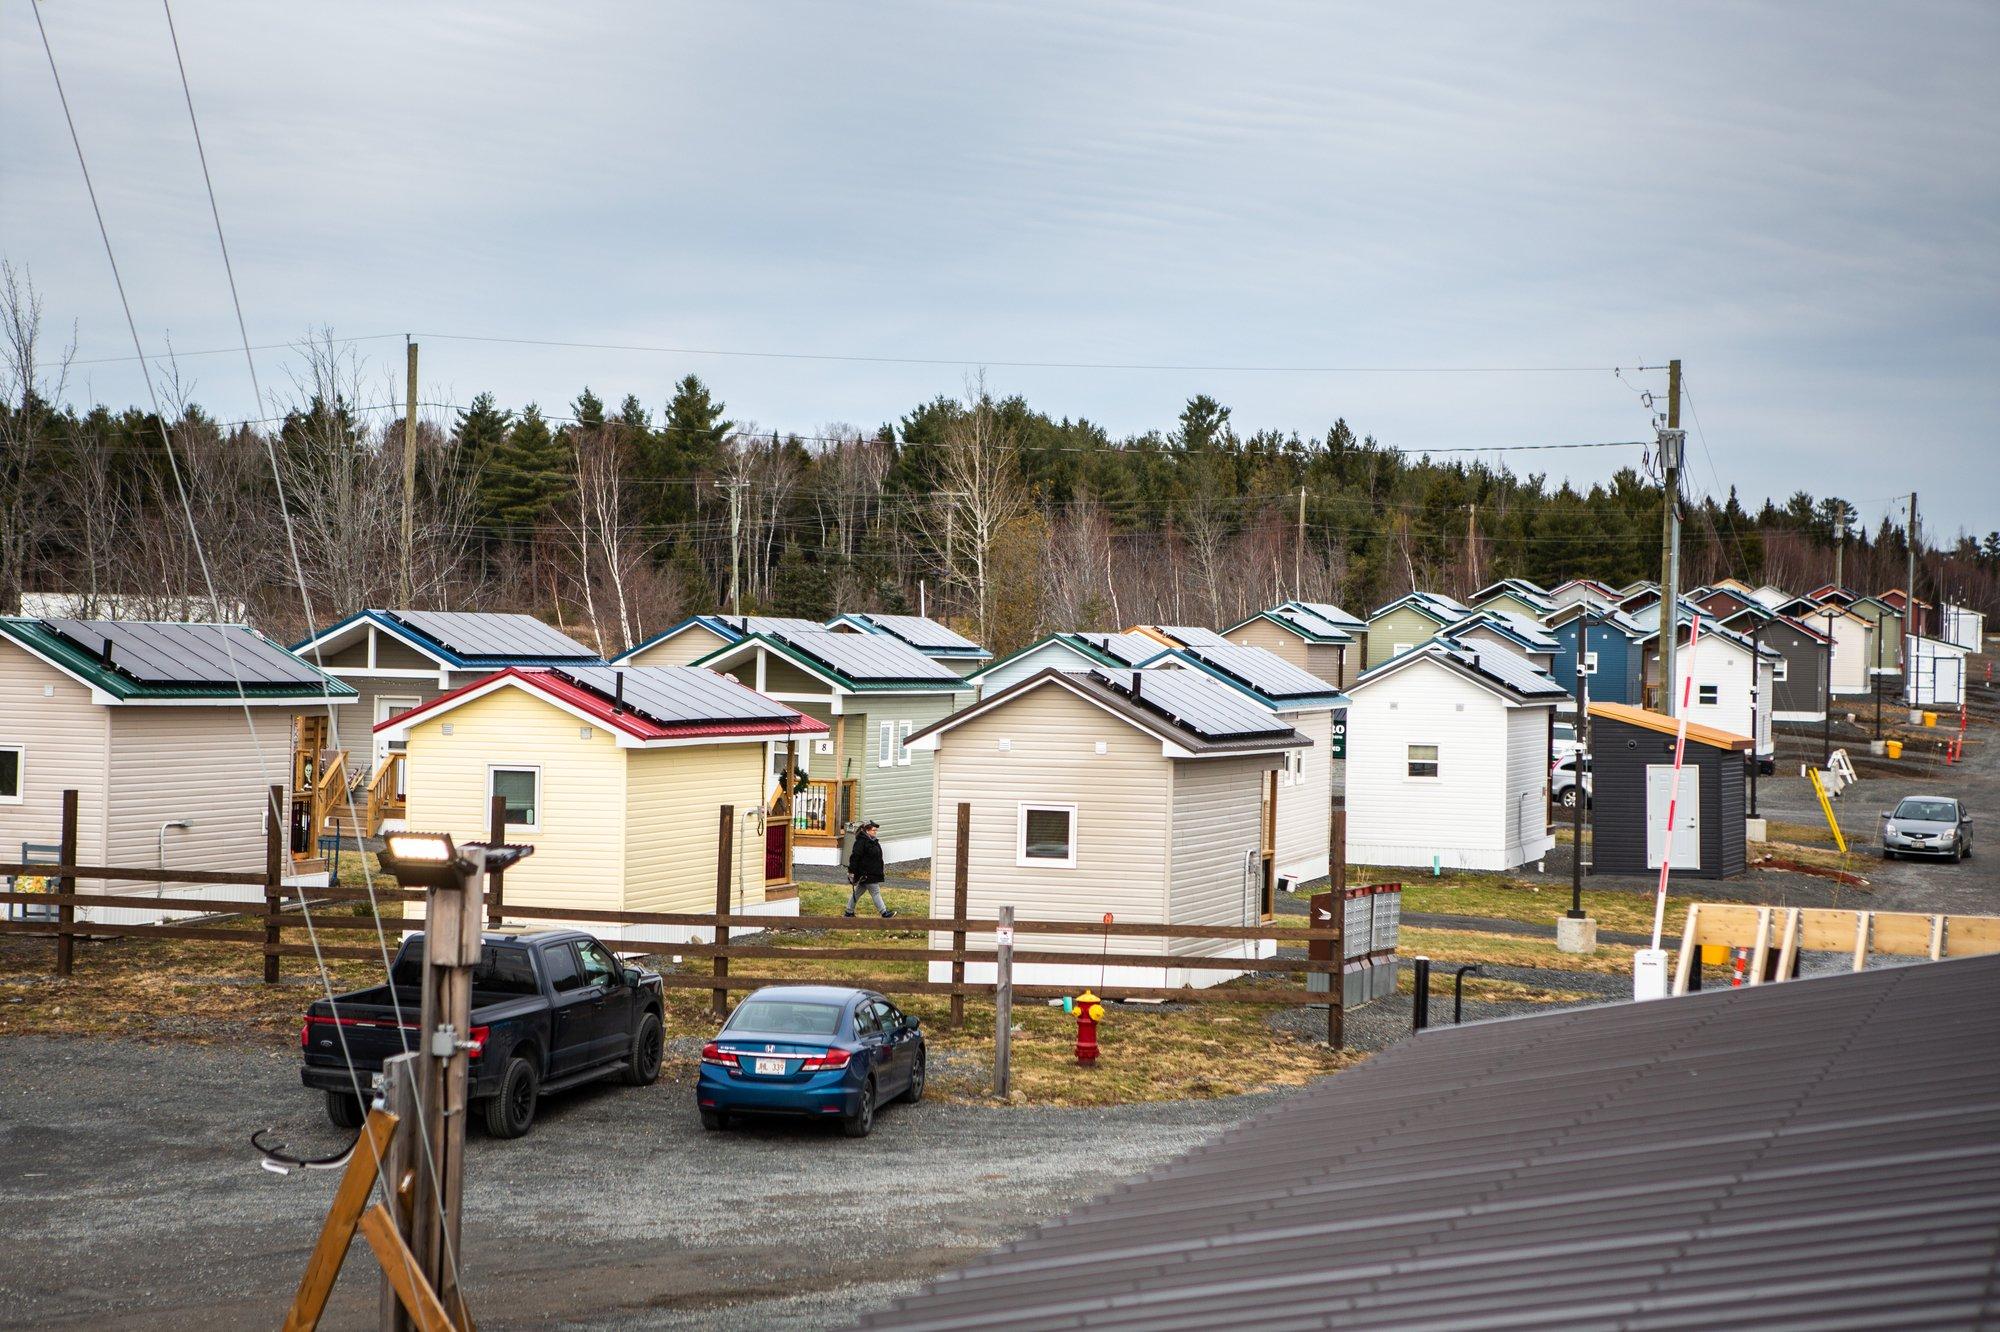 A photo of a cluster of tiny light-coloured homes against the backdrop of a forested hill behind